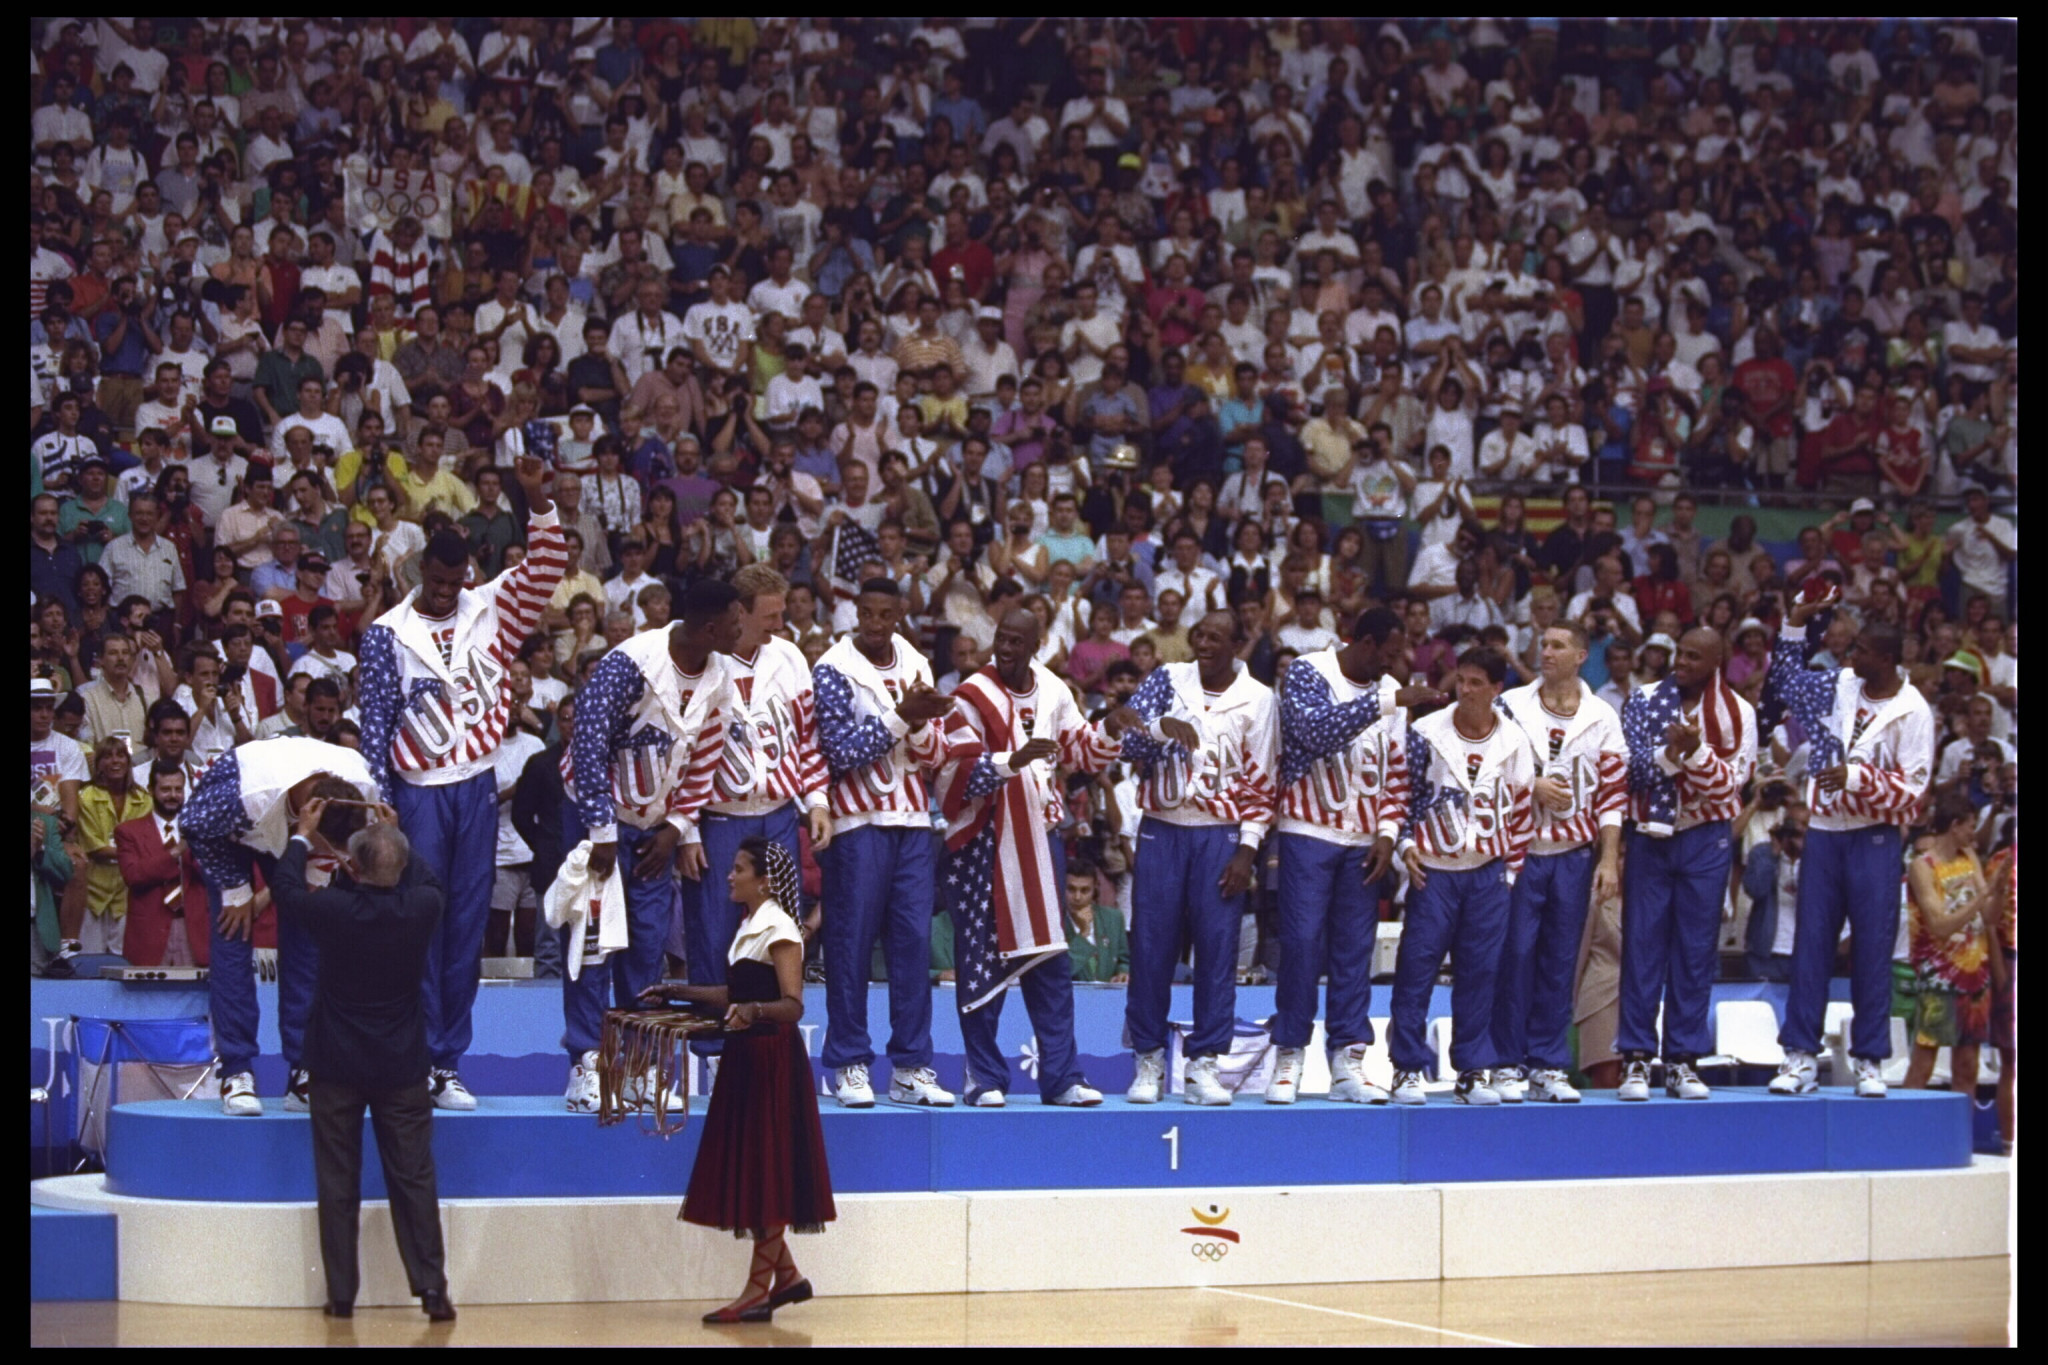 The men's basketball team from Barcelona 1992 were among the award winners last year ©Getty Images